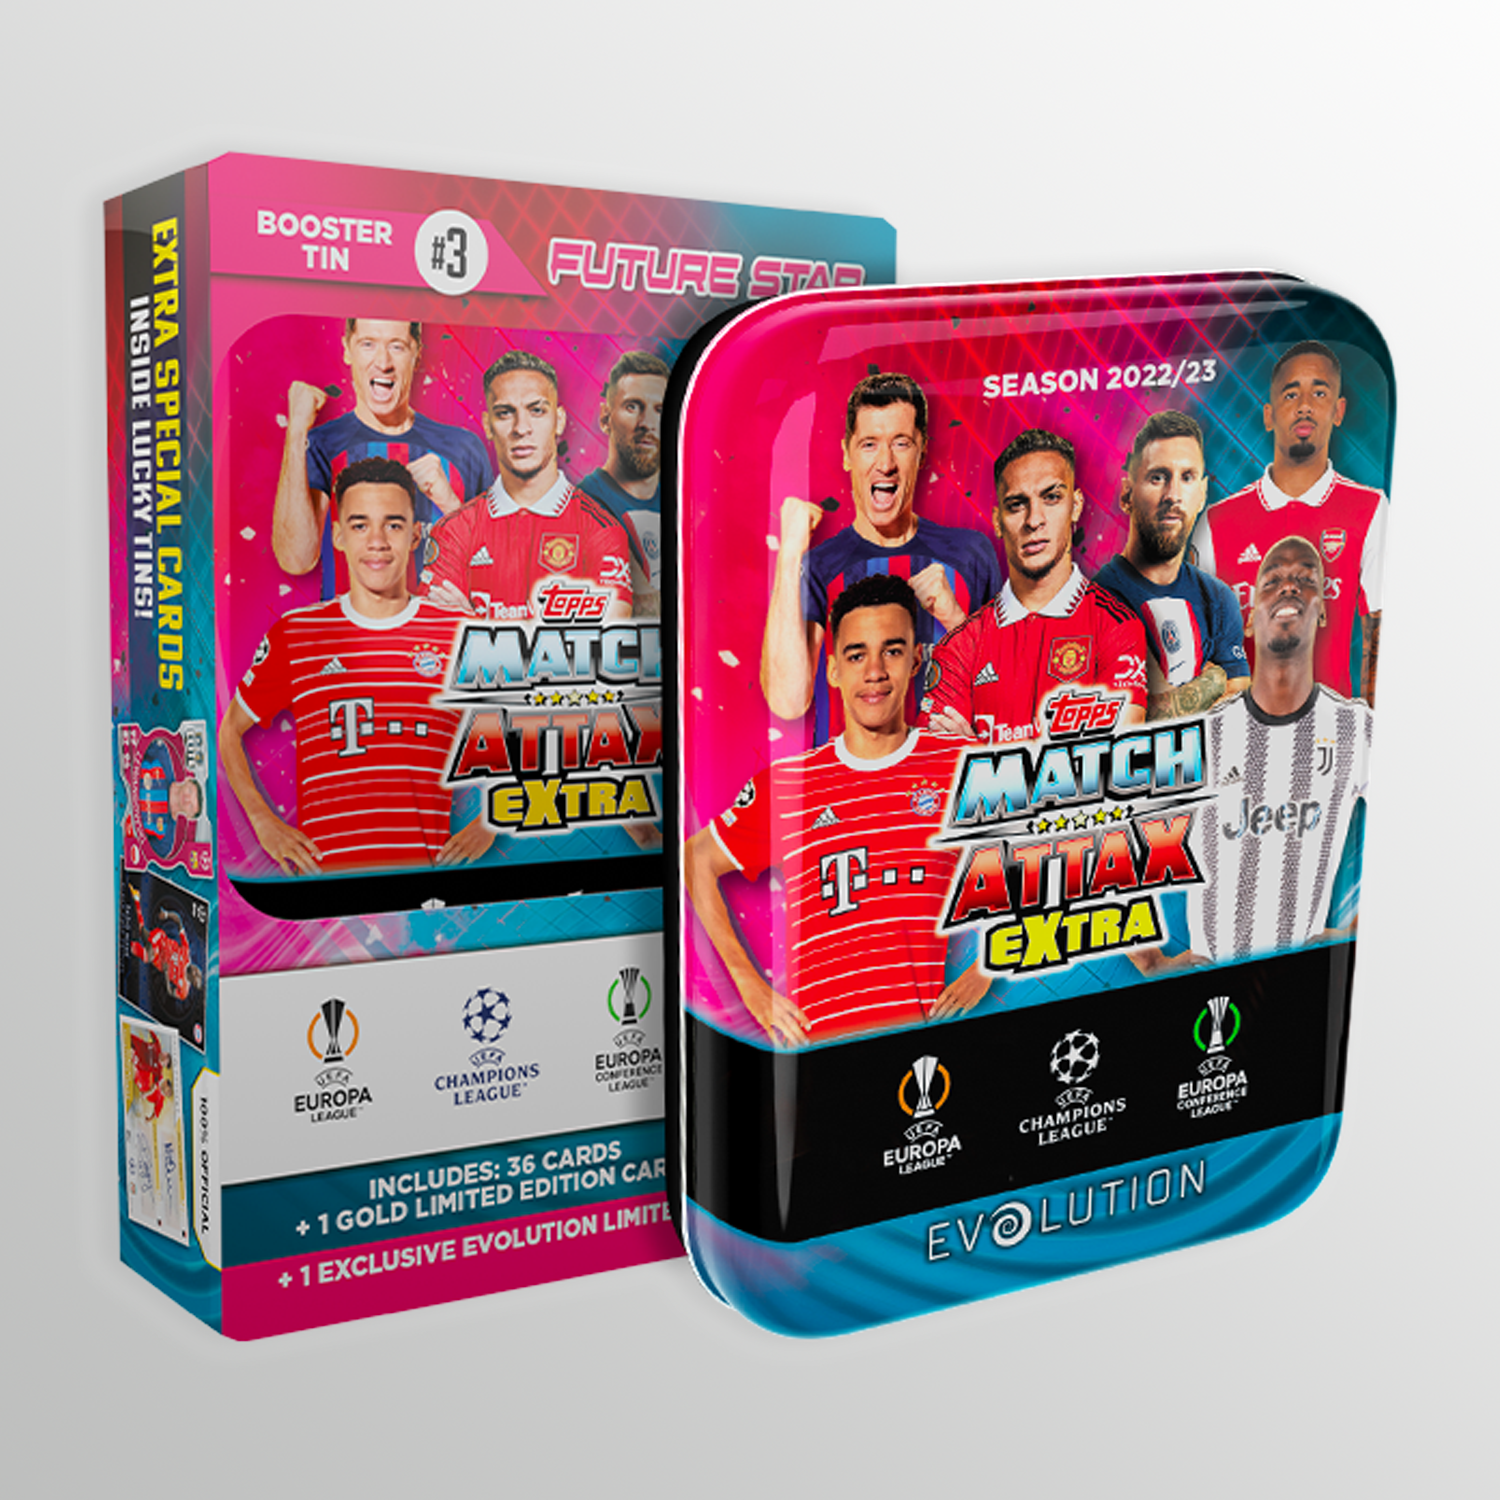 Match Attax Extra 2023 - Booster Tin - Future Star UEFA Club Competitions Online Store